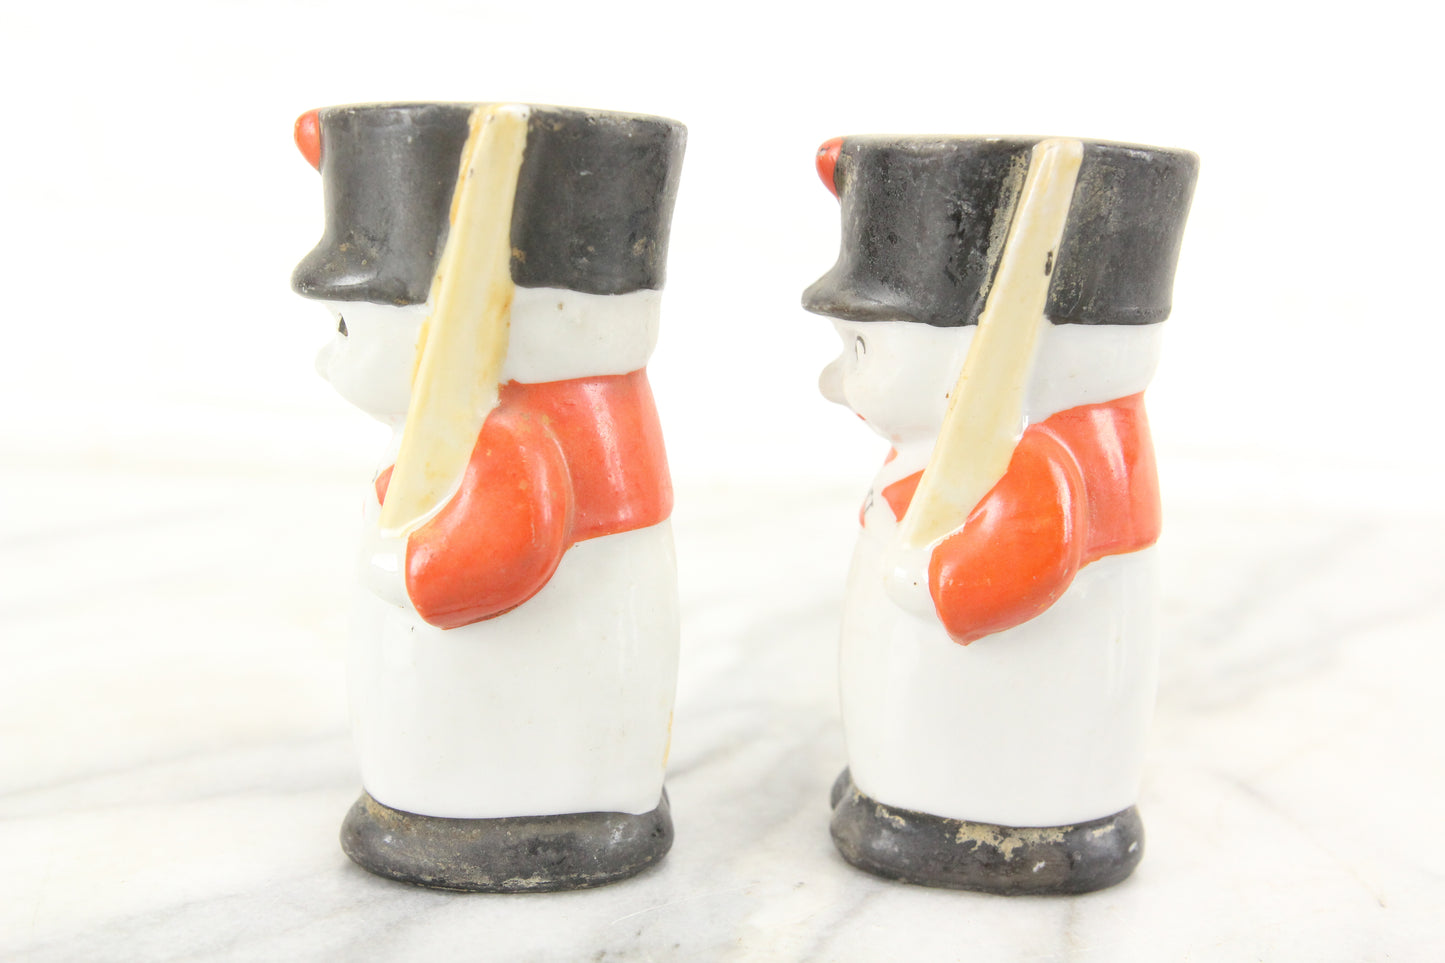 Soldier Porcelain Salt and Pepper Shakers, Made in Japan